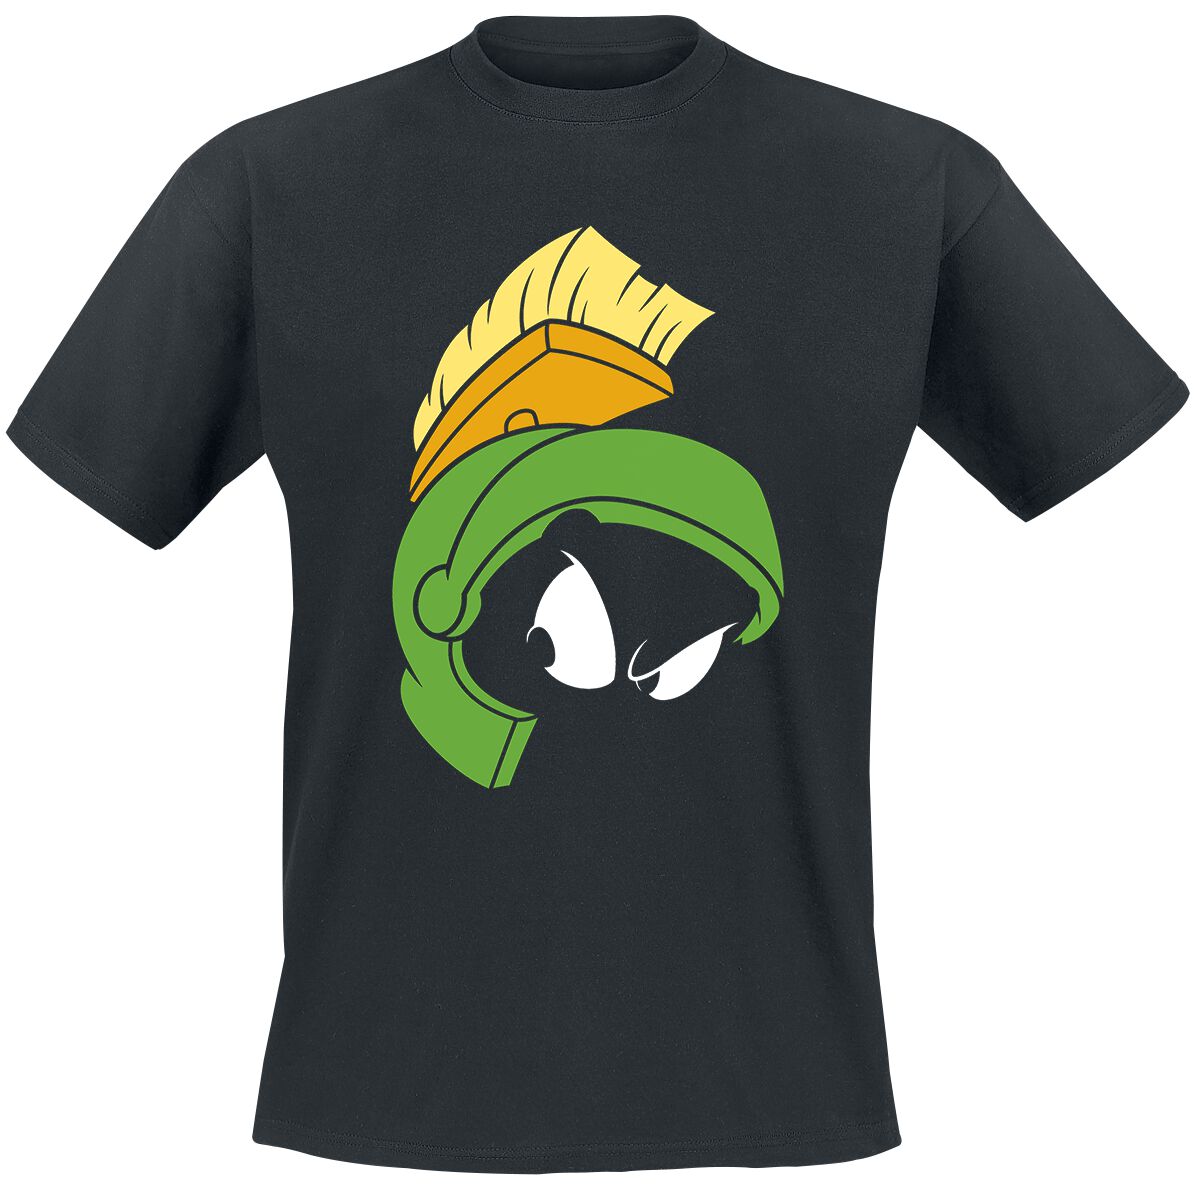 Looney Tunes Marvin The Martian T-Shirt black